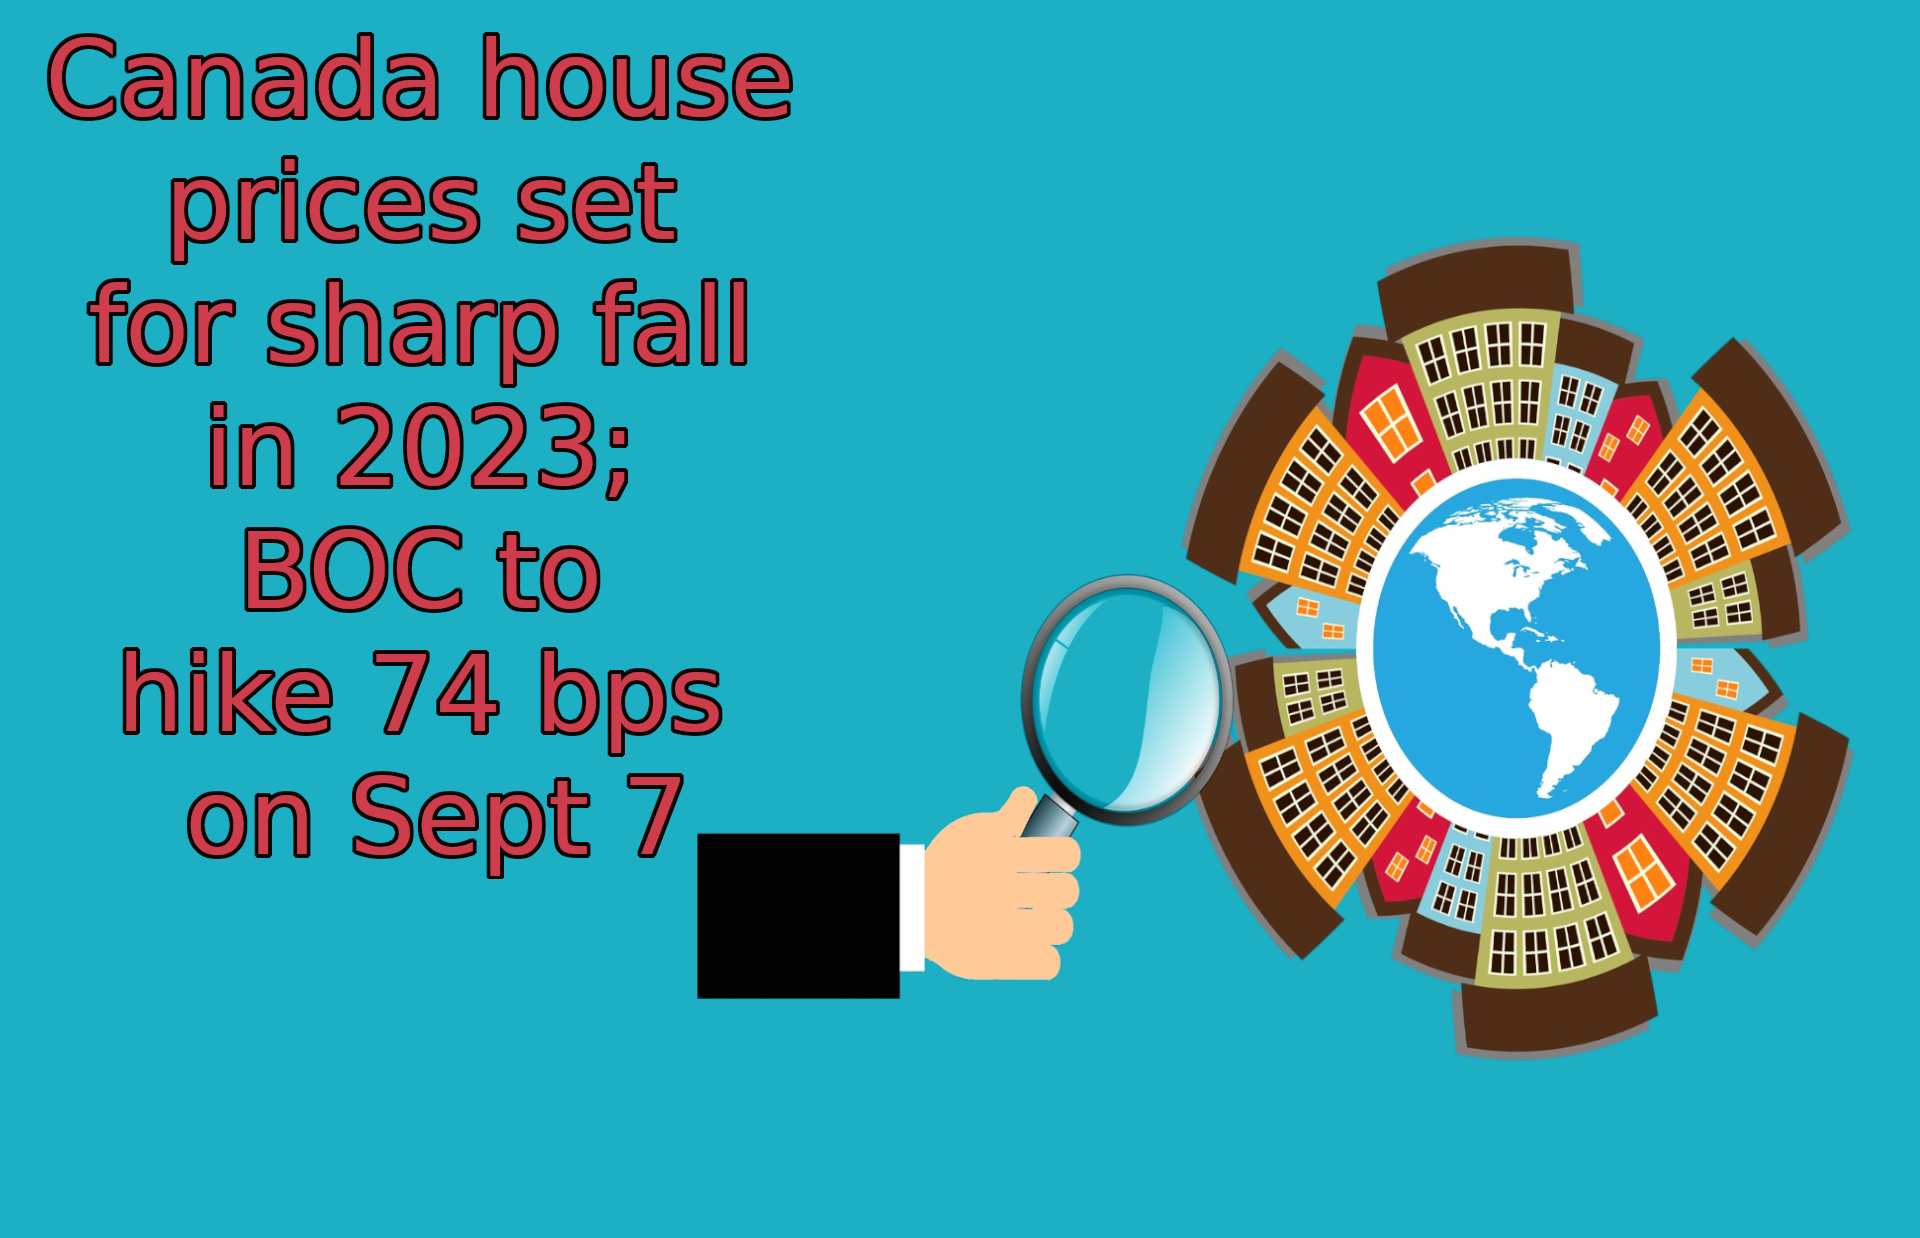 Canada house prices set for sharp fall in 2023; BOC to hike 74 bps on Sept 7